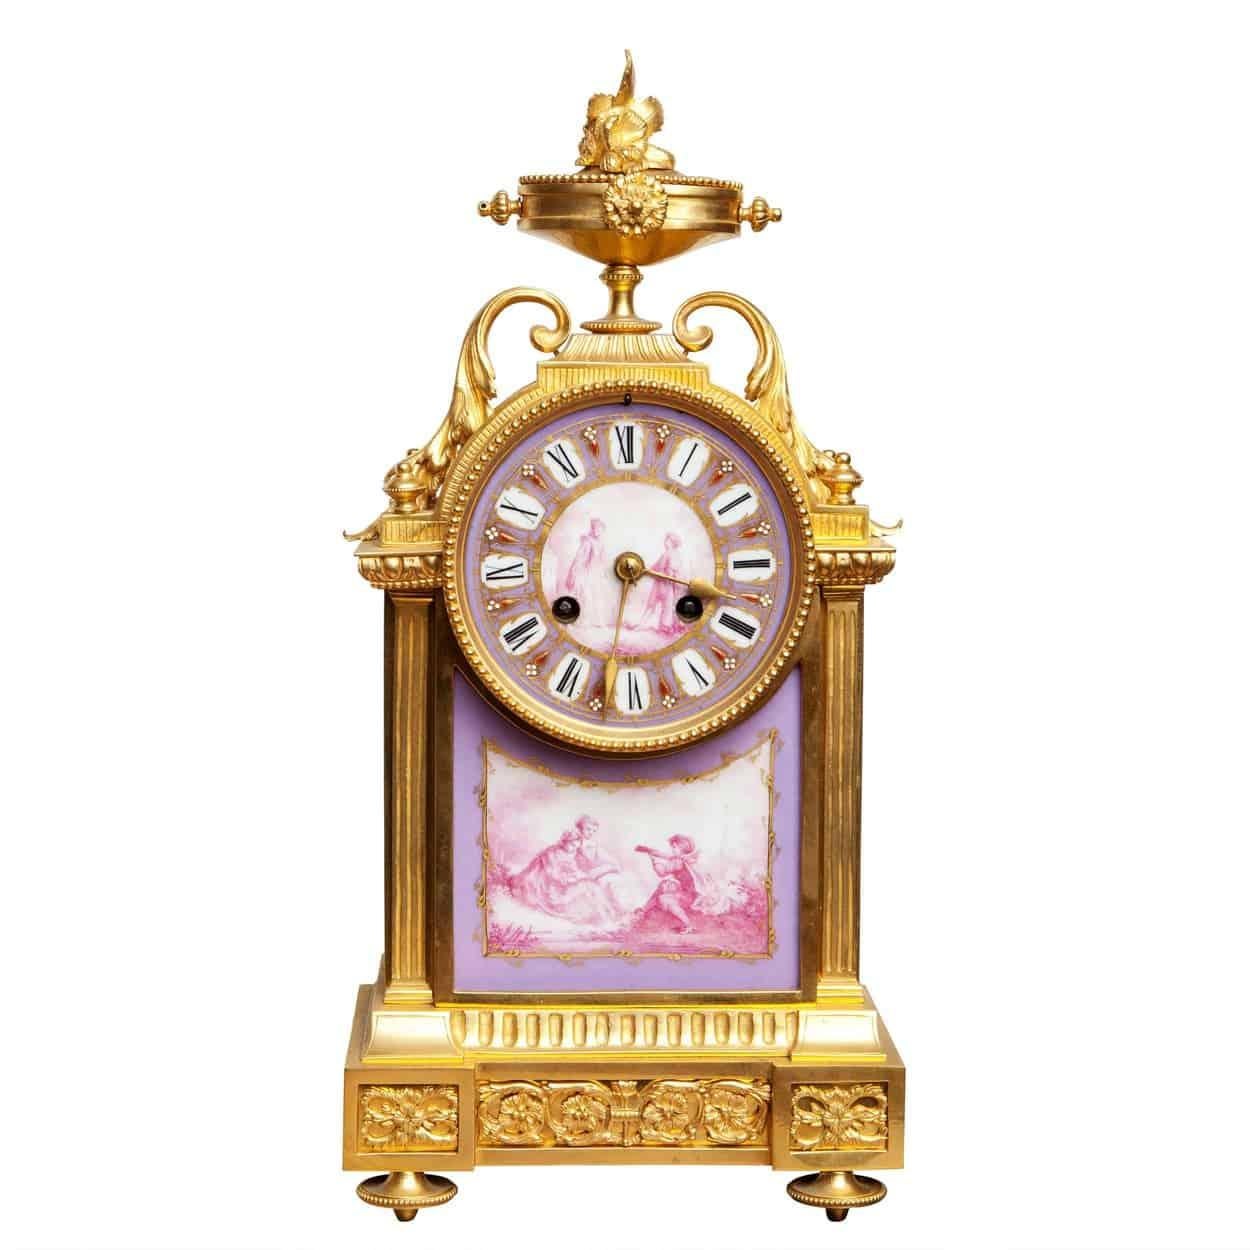 France, circa 1880

The ormolu case mounted with fine painted porcelain scenes of a courting couple. This unusual mauve colour pallet emphasizes the quality and cleanliness of the clock.

Strikes every half hour and hour.  

Measures: Height